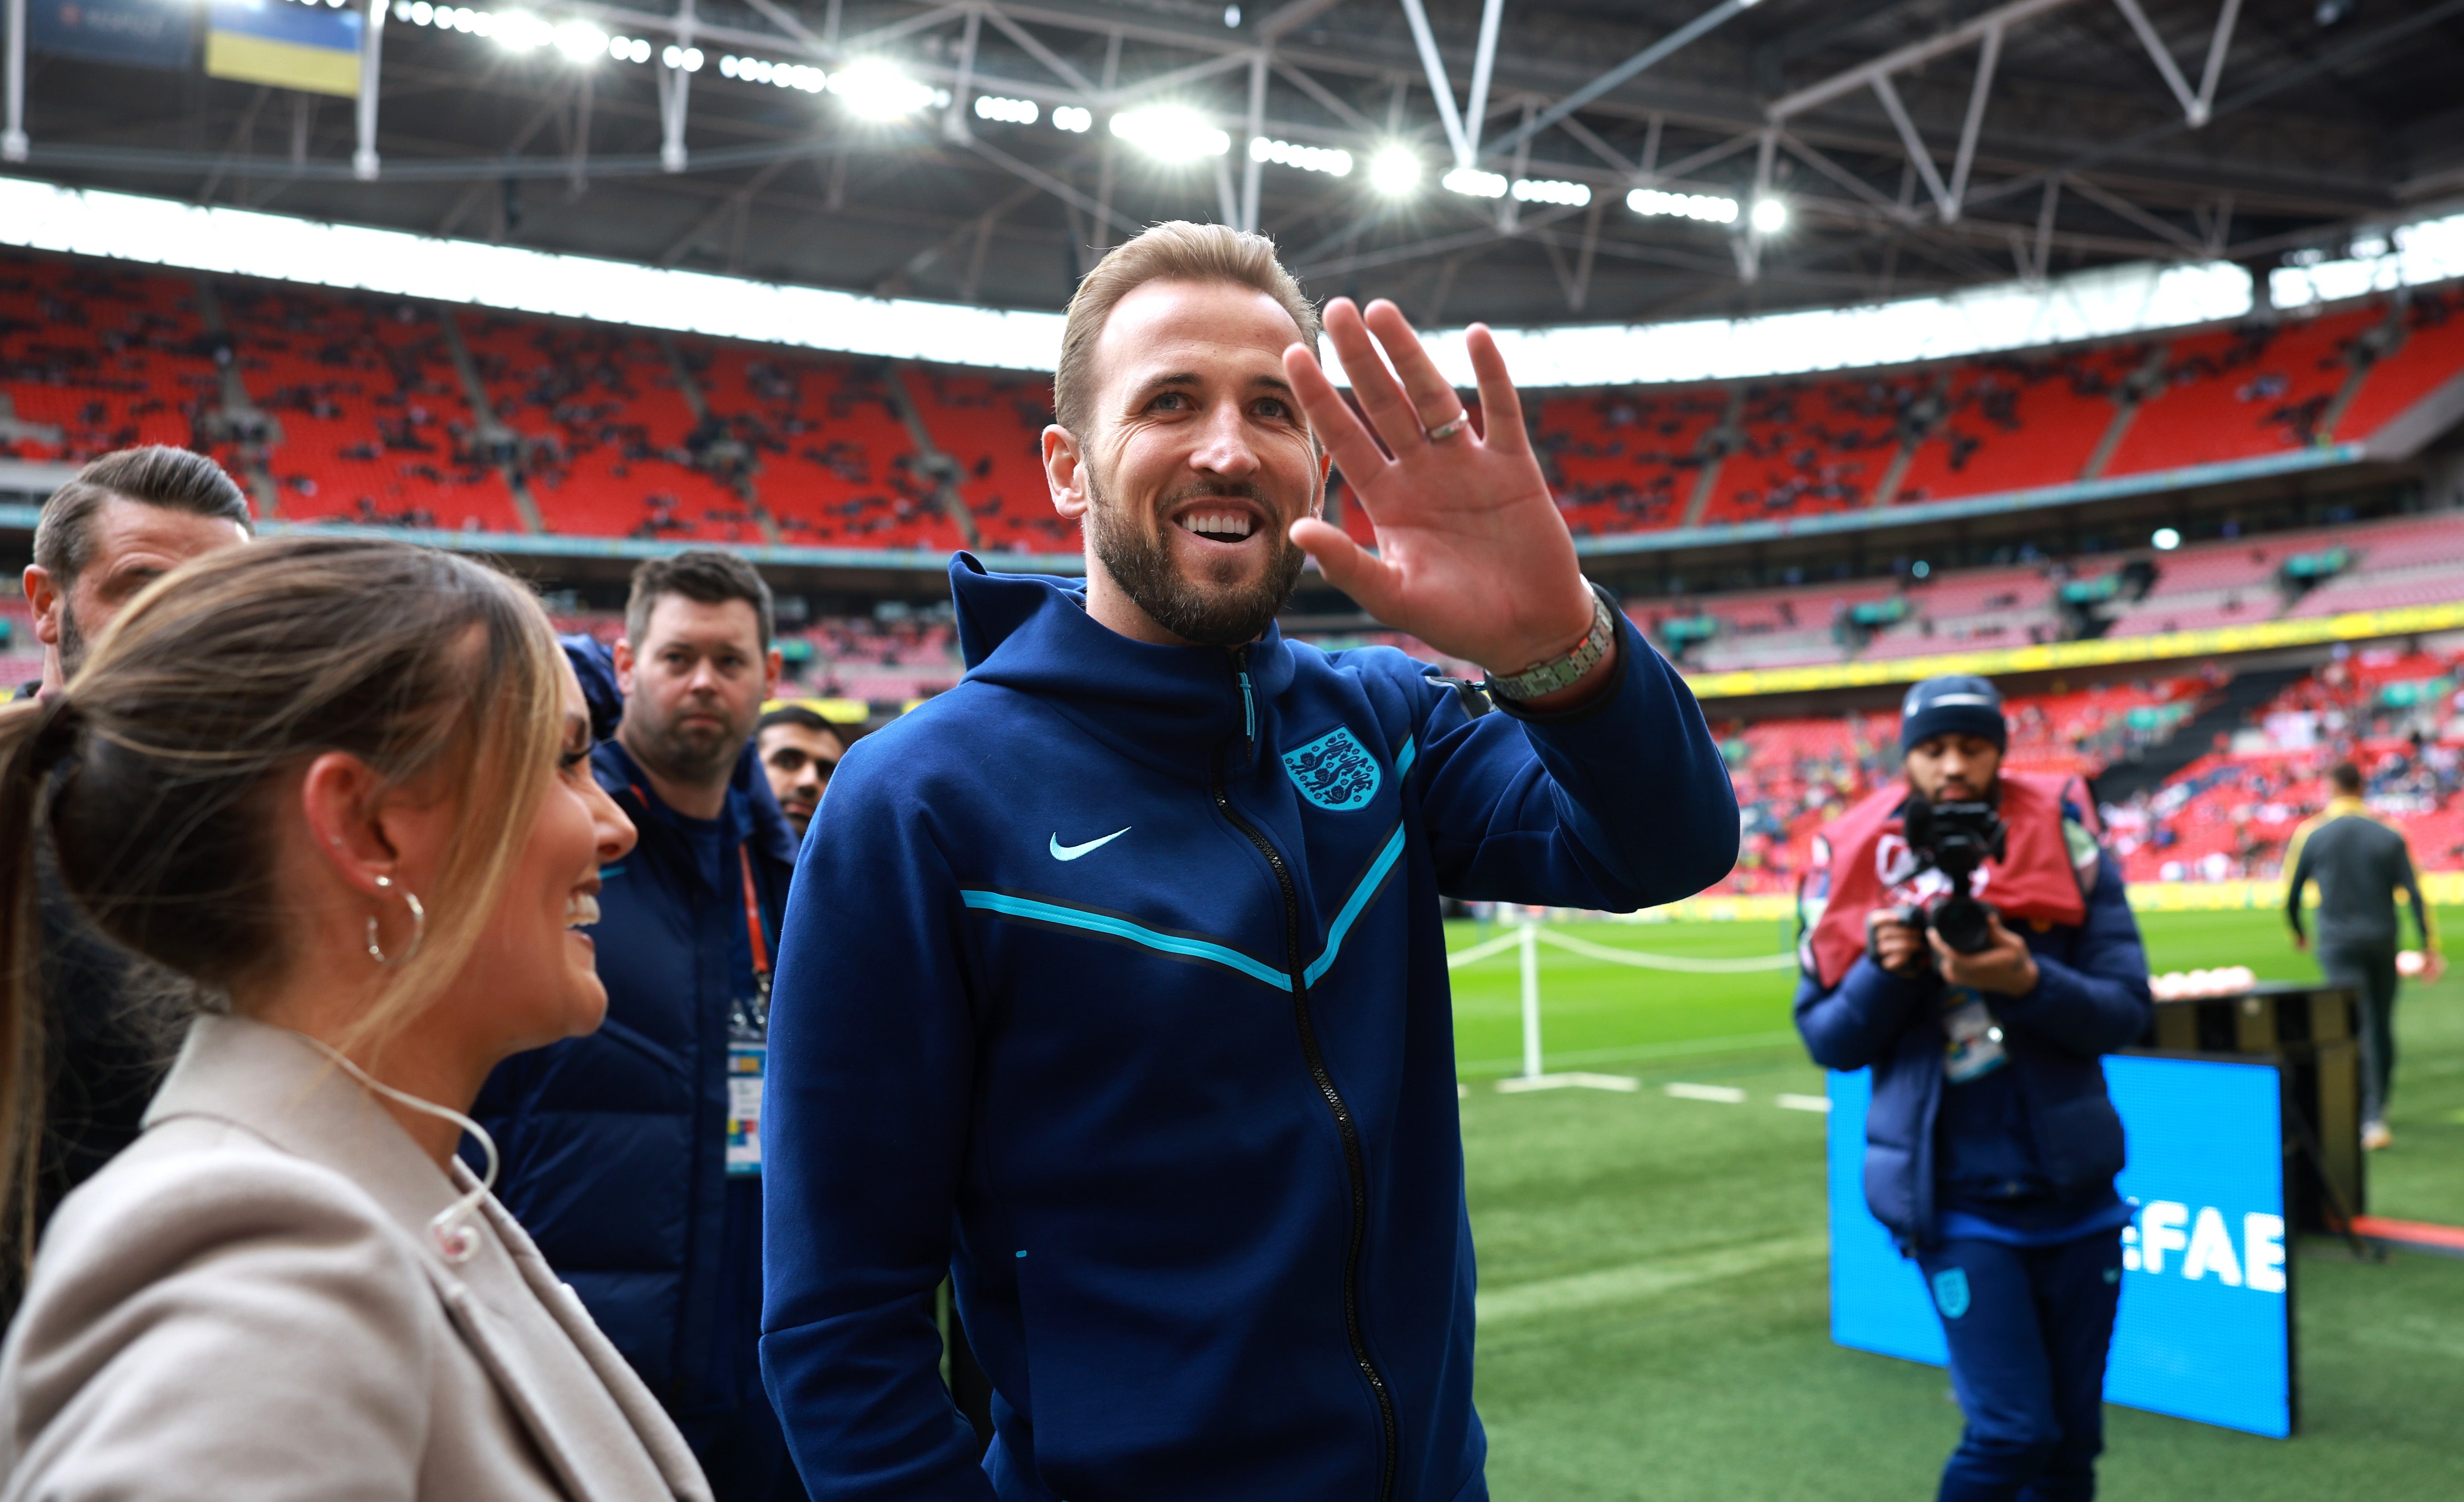 Harry Kane will receive a presentation before kick-off